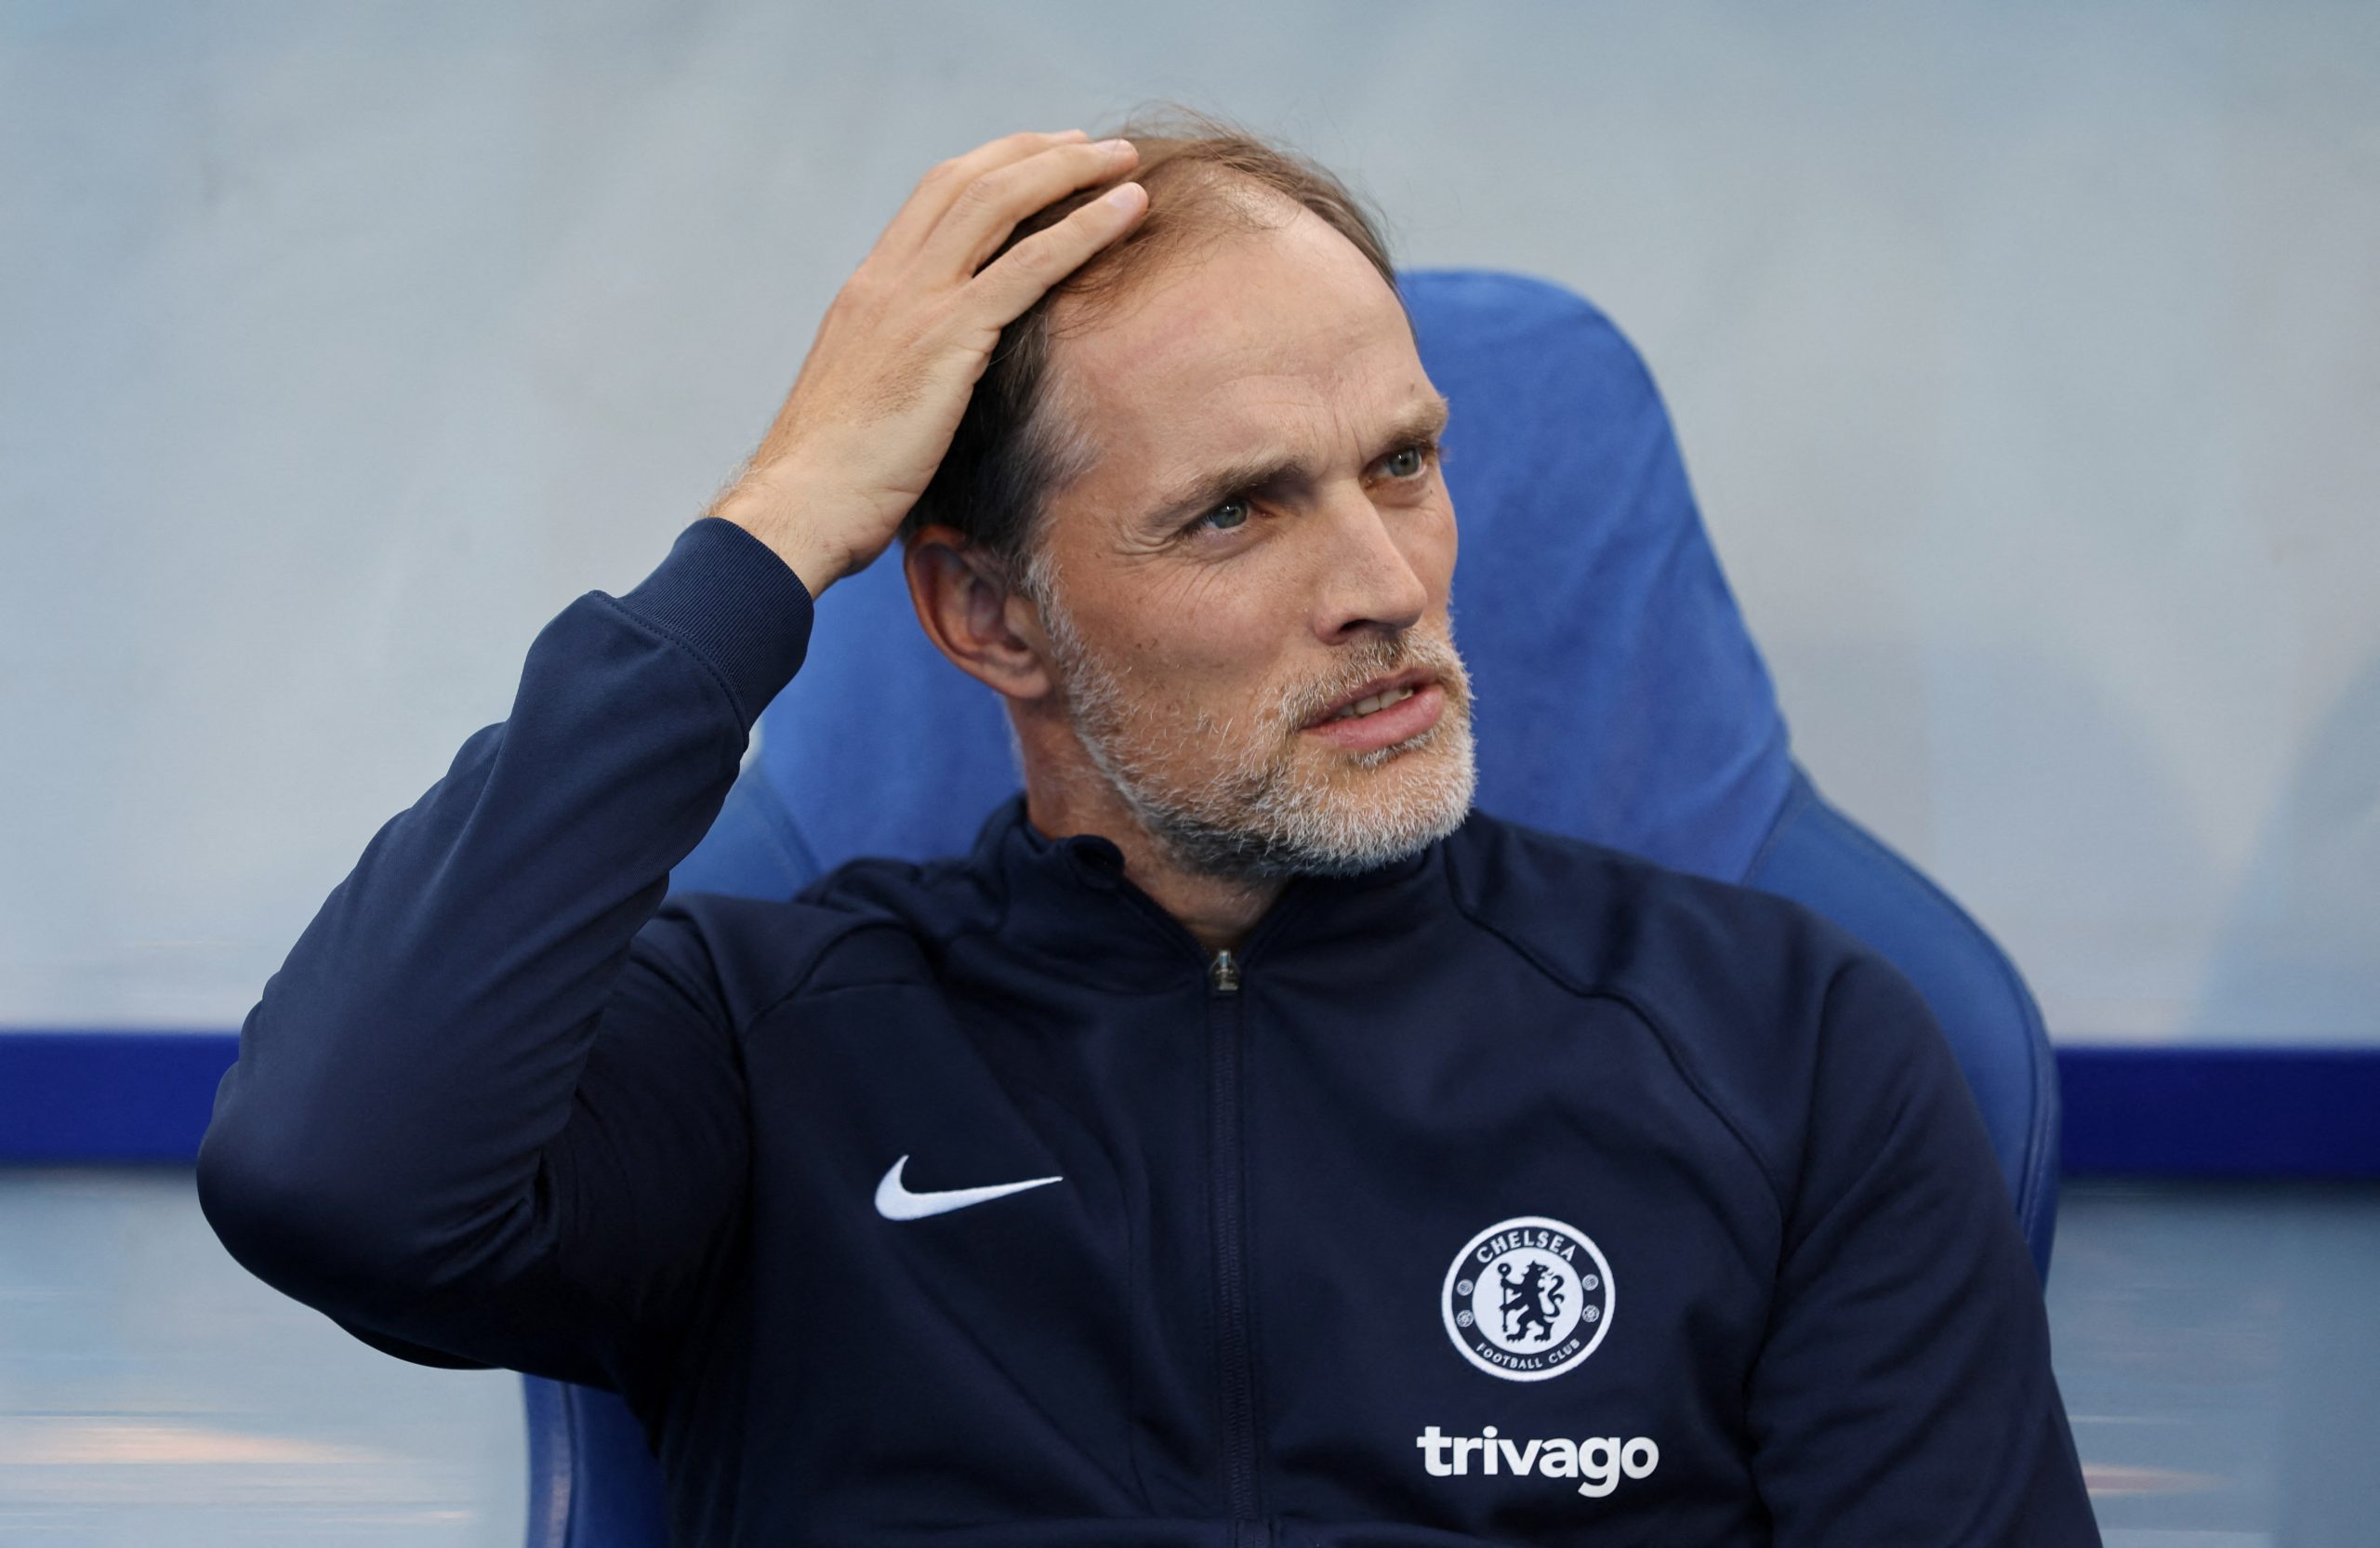 thomas-tuchel-boehly-champions-league-winner-chelsea-transfer-news-sacked-todd-boehly-news-cfc-ucl-premier-league-tuchel-sacked-the-athletic-ornstein